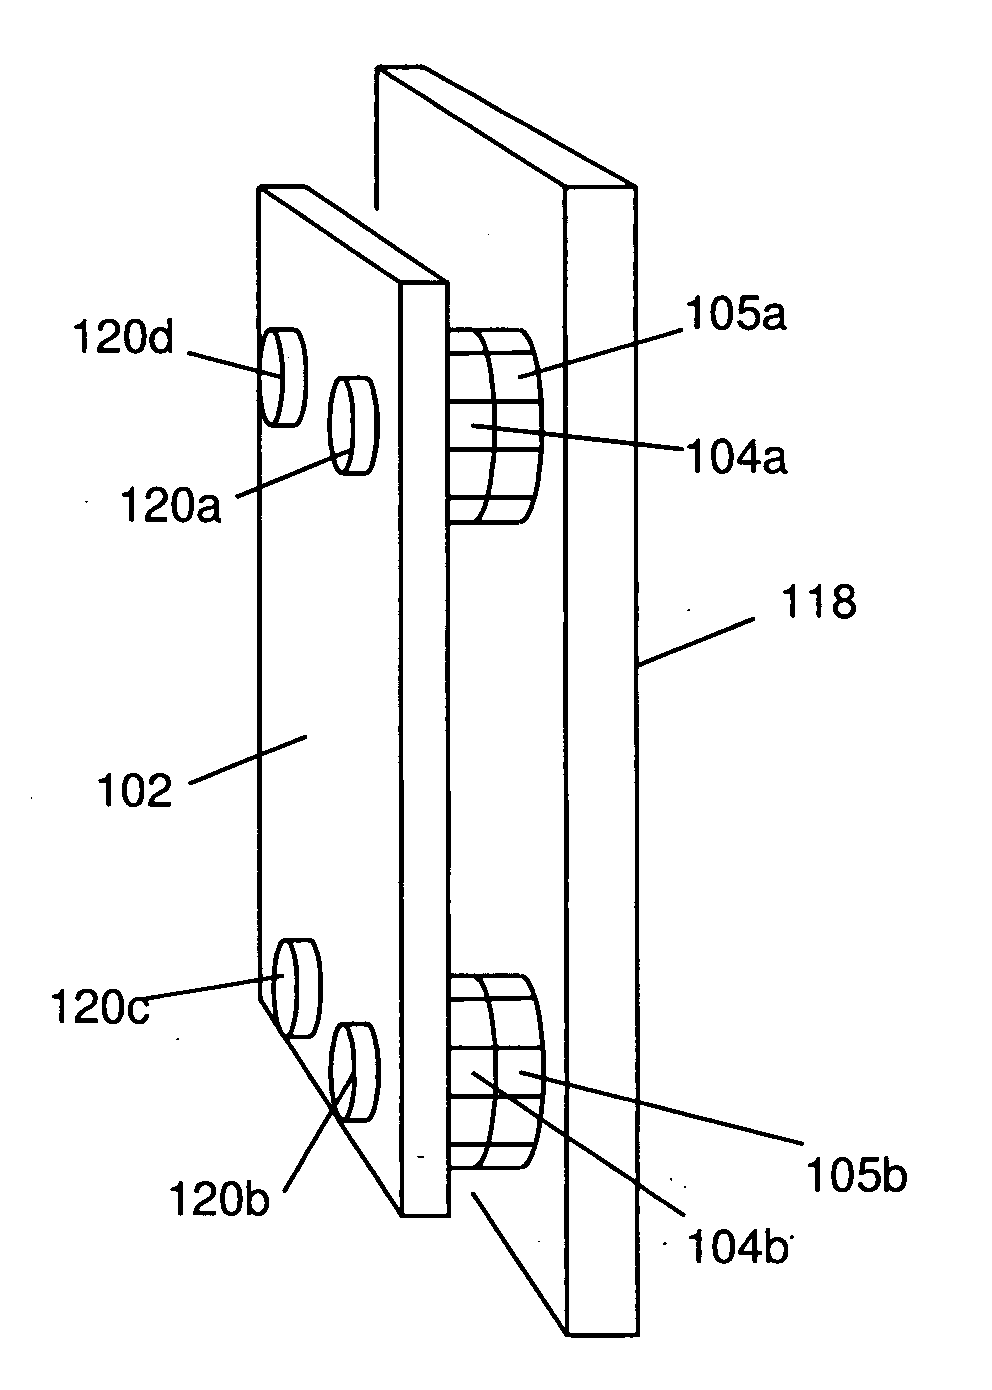 Magnetically Attachable and Detachable Panel Method